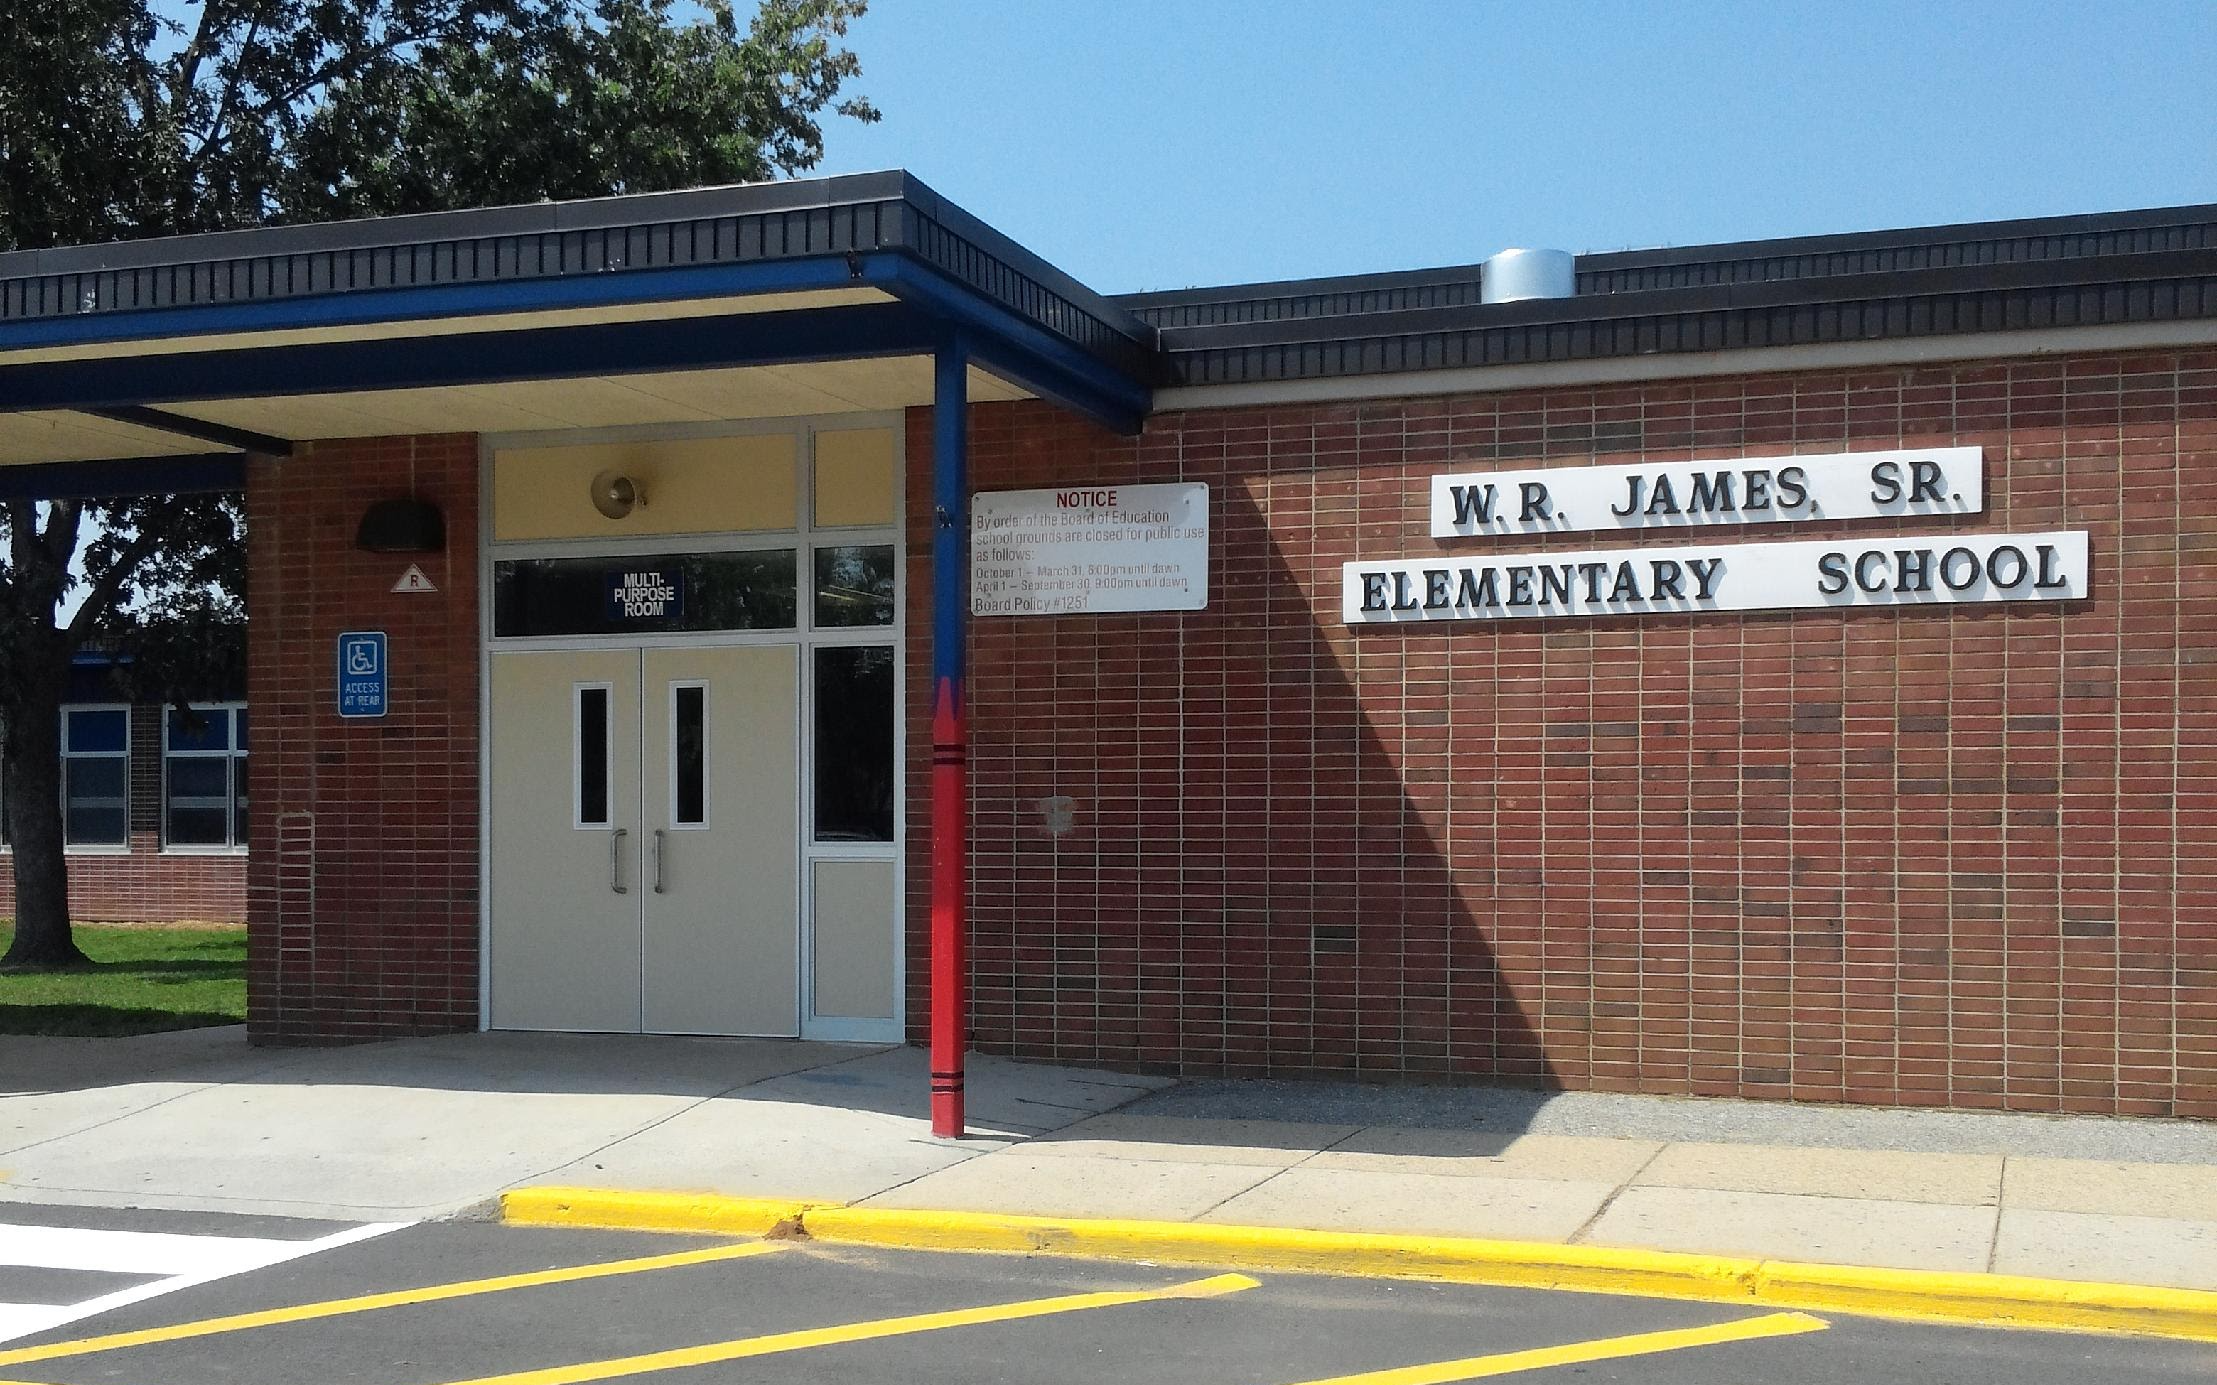 A photo of the W.R. JAMES ELEMENTARY school.